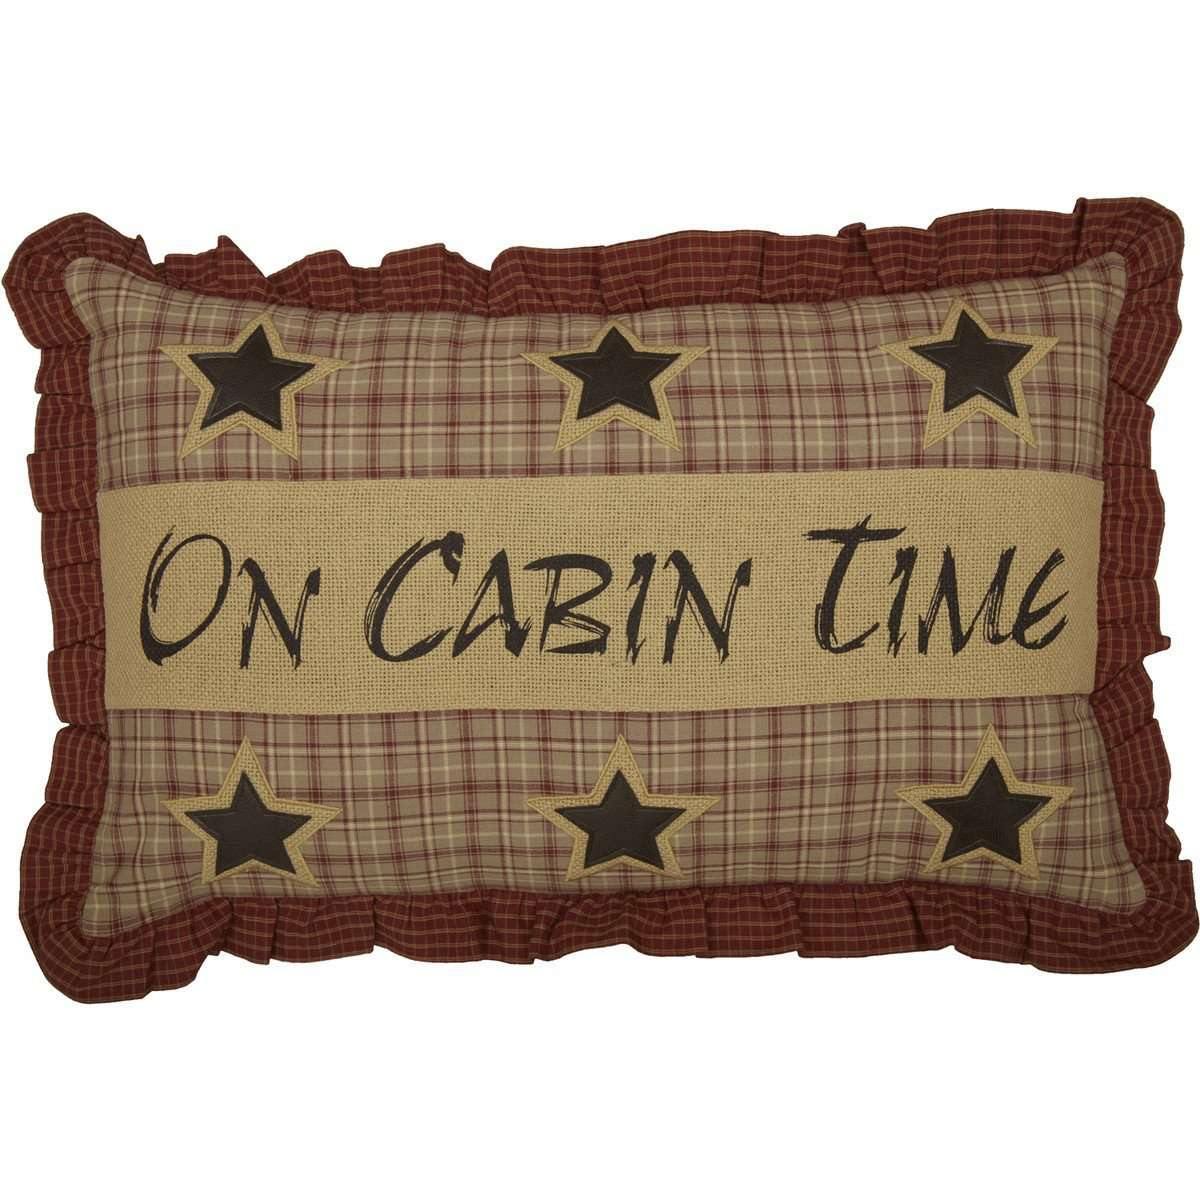 Dawson Star On Cabin Time Pillow 14x22 VHC Brands front